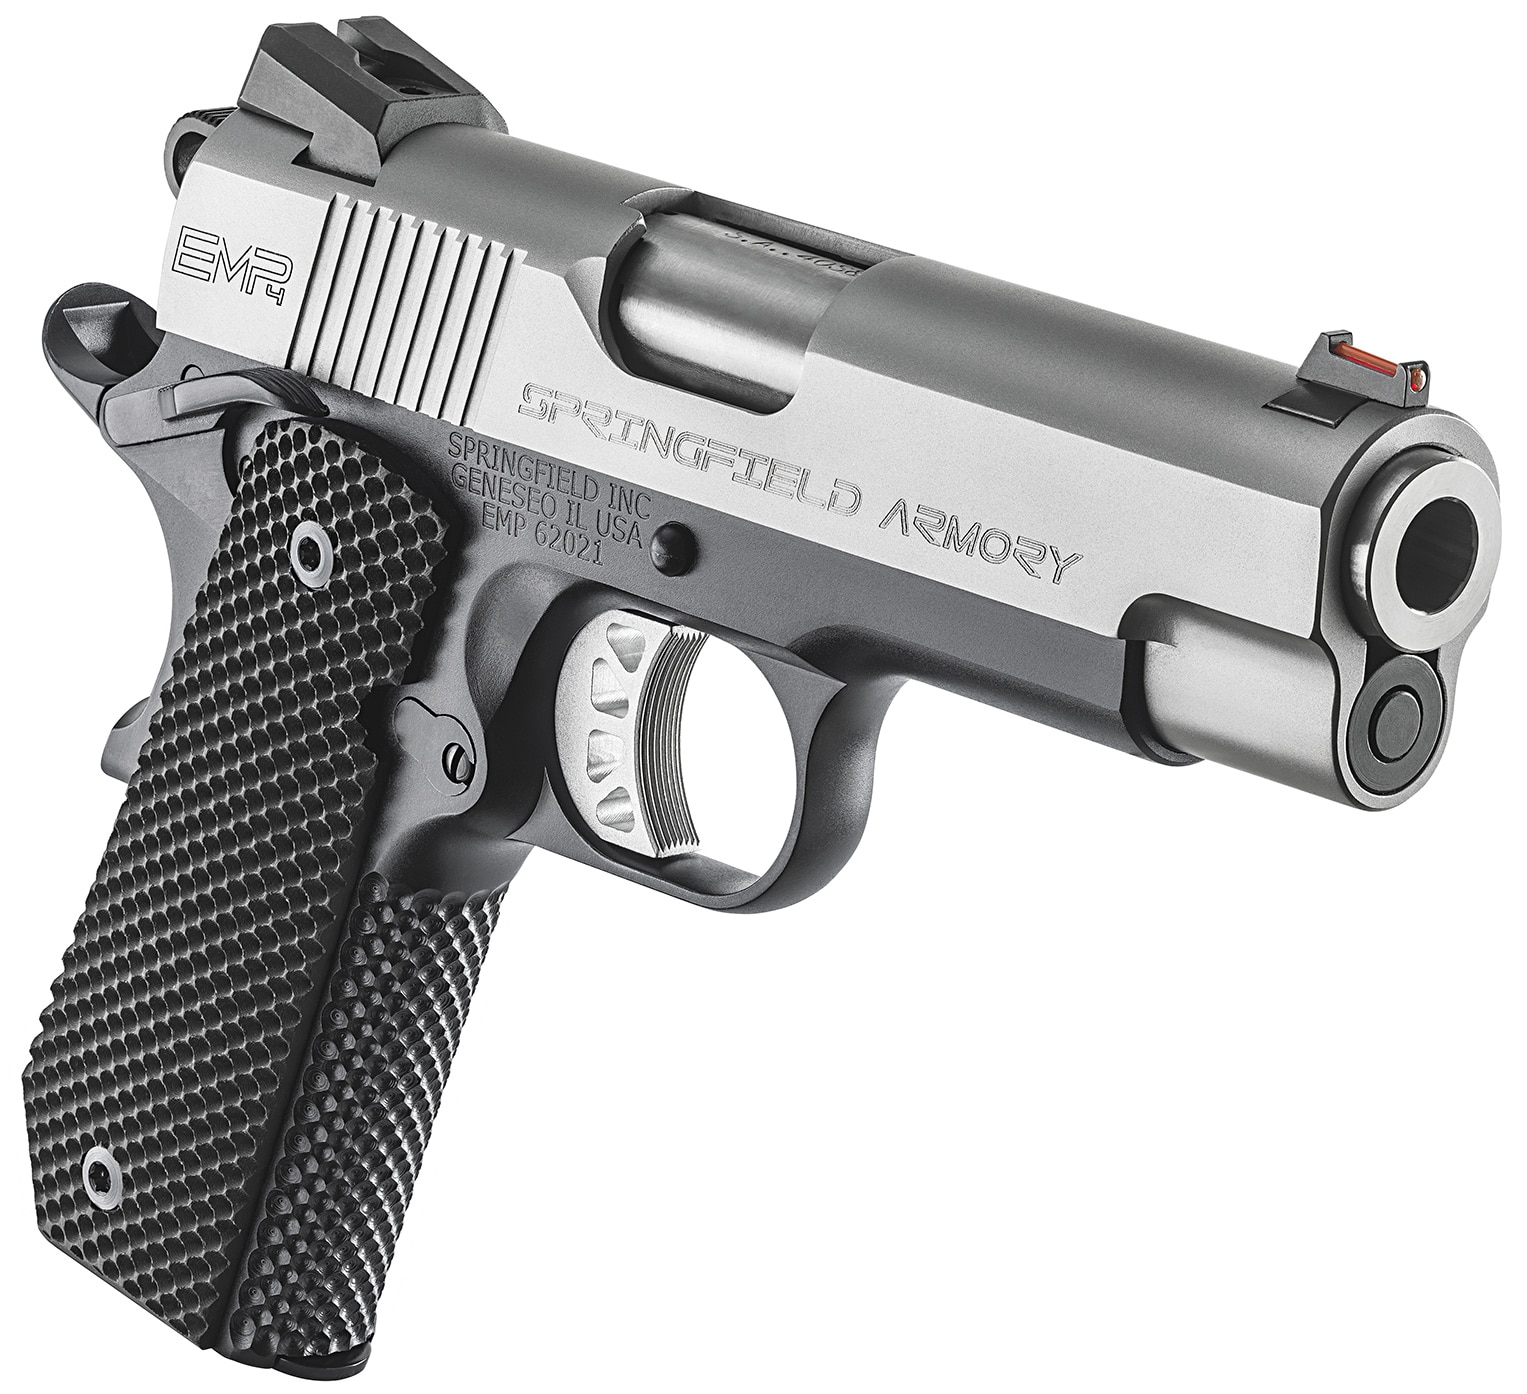 The Springfield Armory EMP 1911 pistol chambered in .40 S&W. (Photo: Springfield)